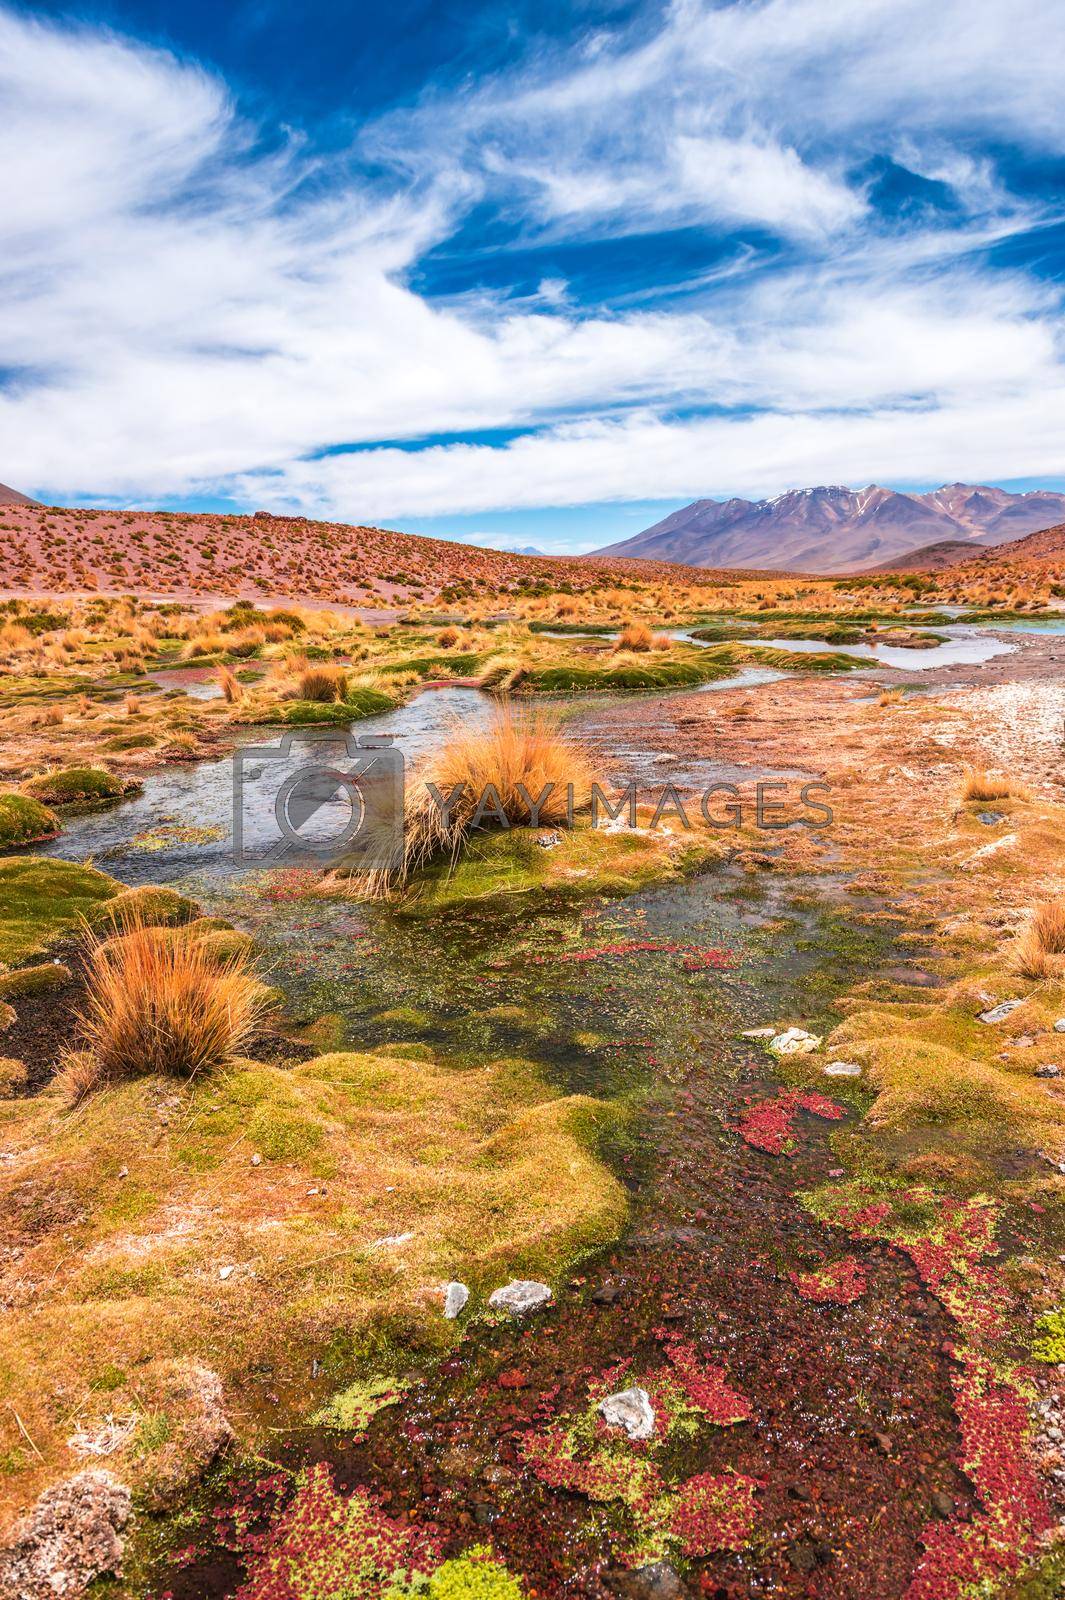 Royalty free image of Lagoon landscape in Bolivia by tan4ikk1